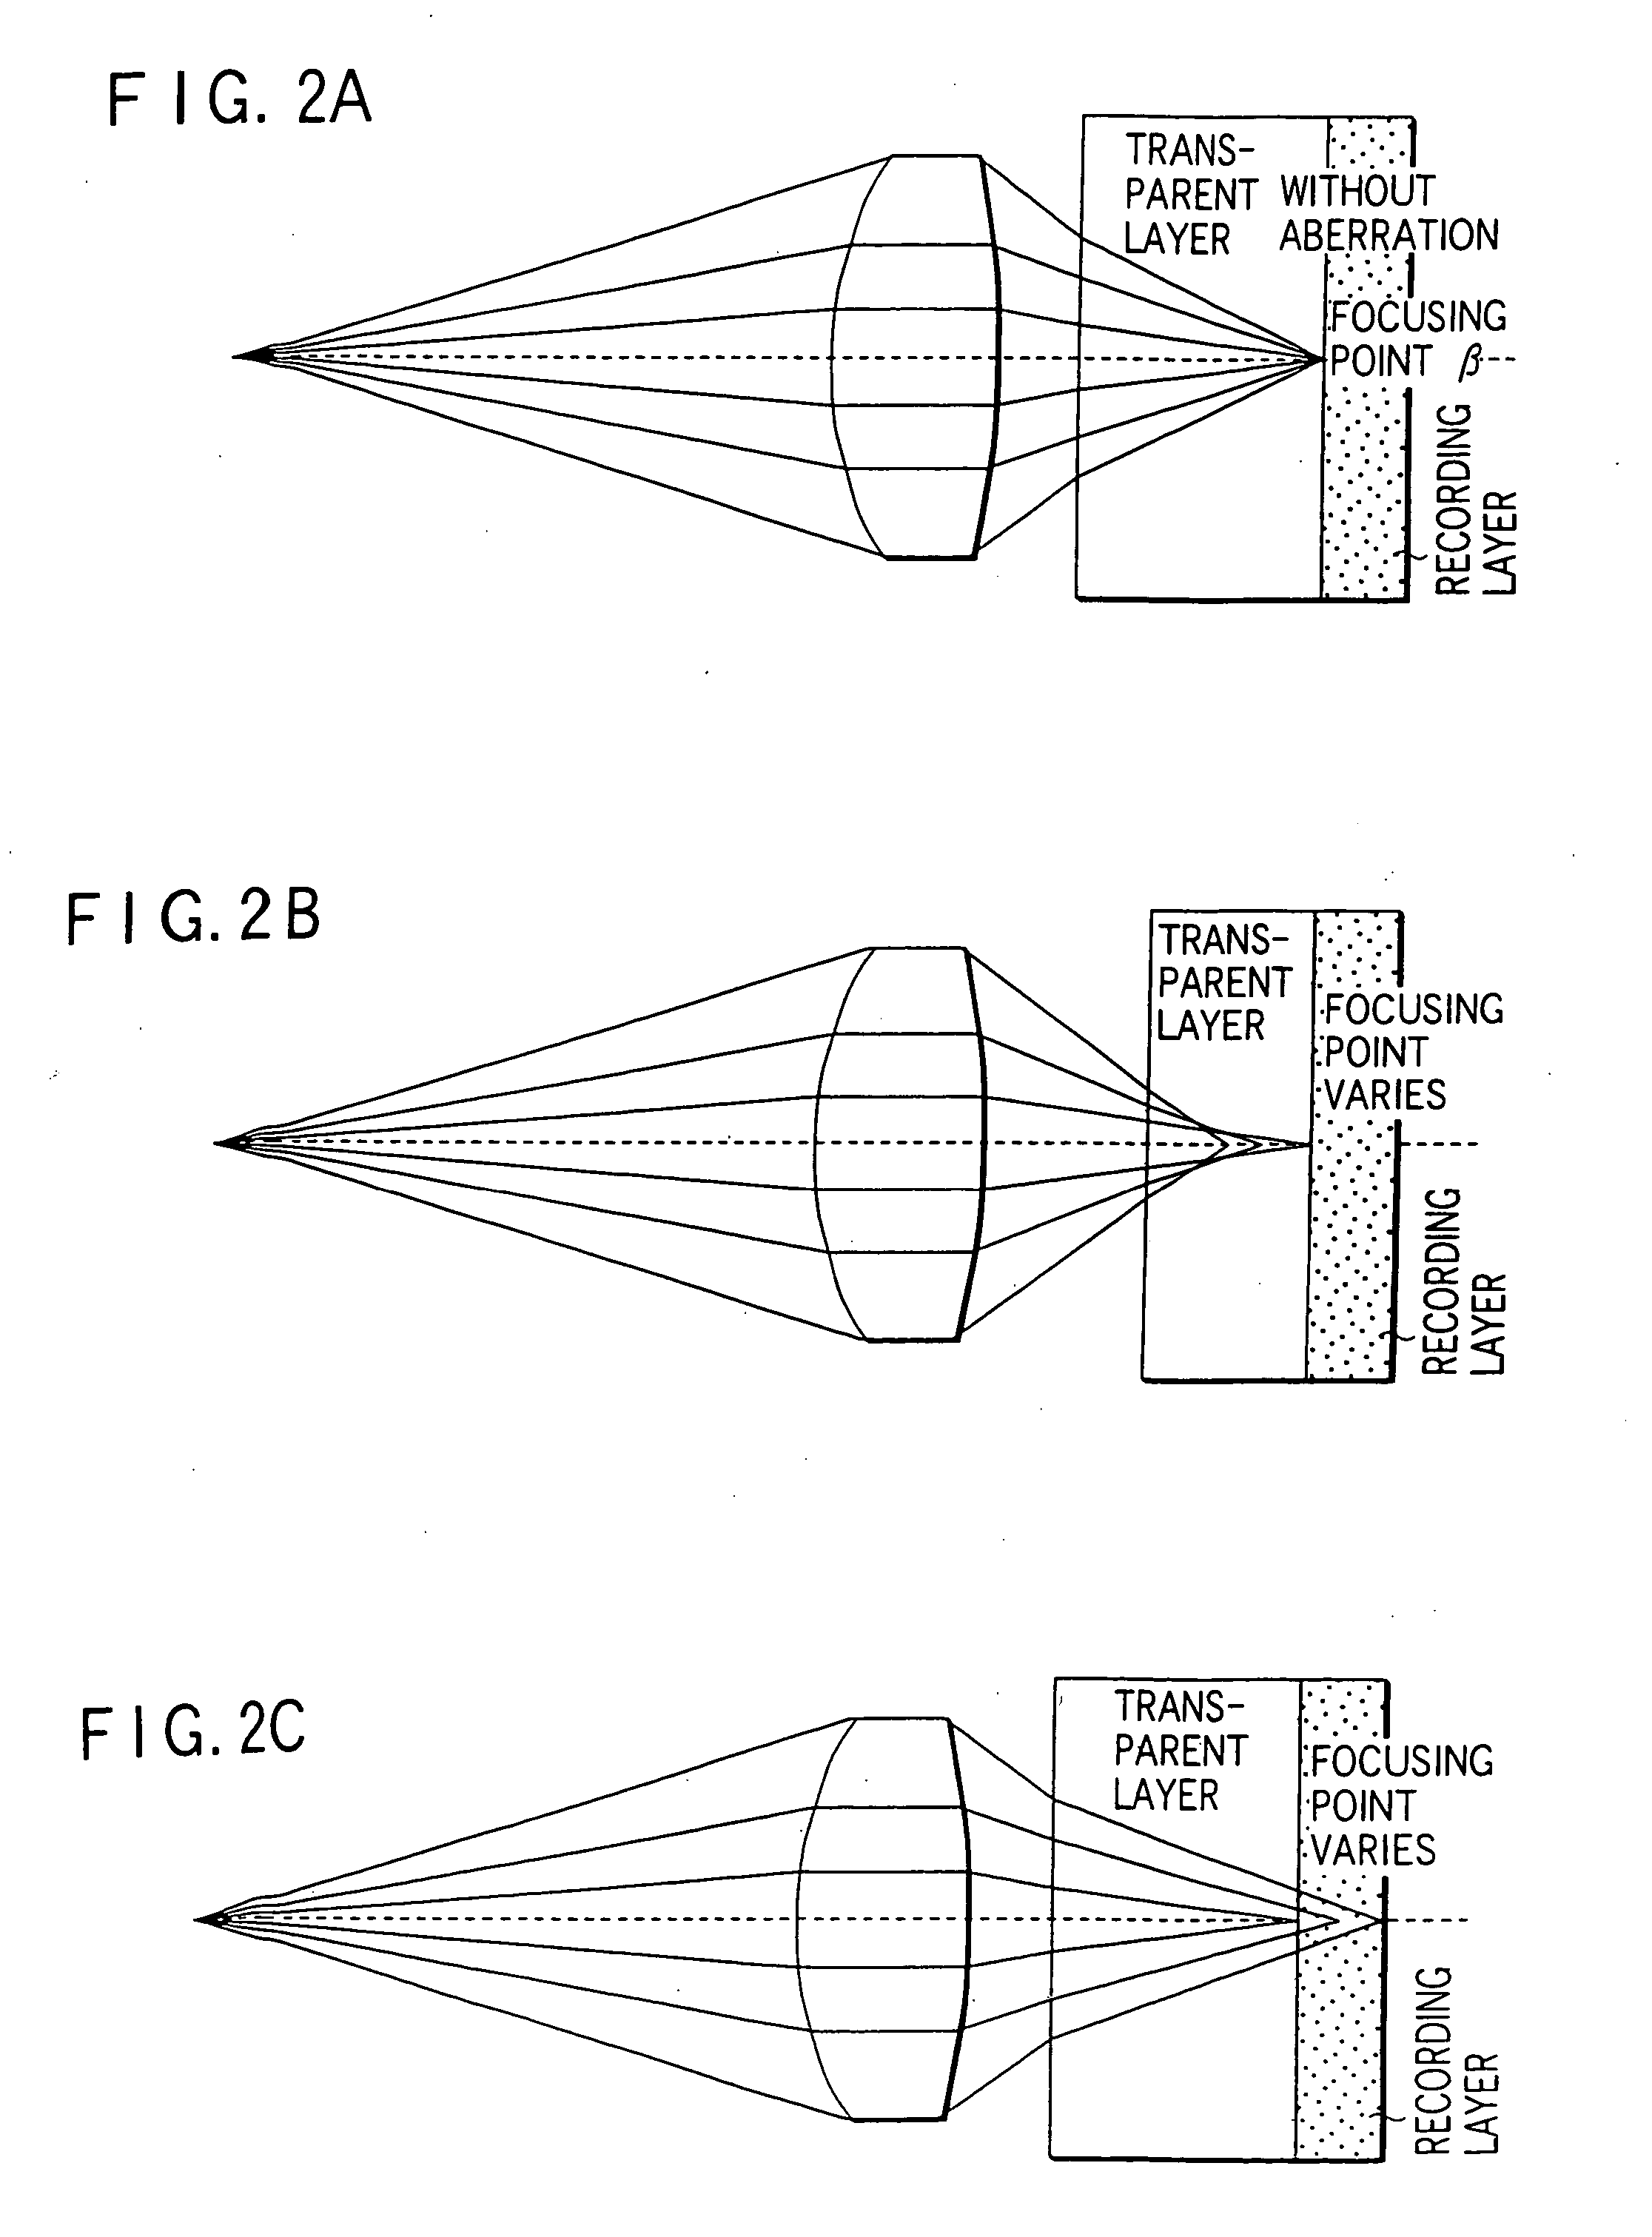 Optical information processing system using optical aberrations and information medium having recording layer protected by transparent layer having thickness irregularity